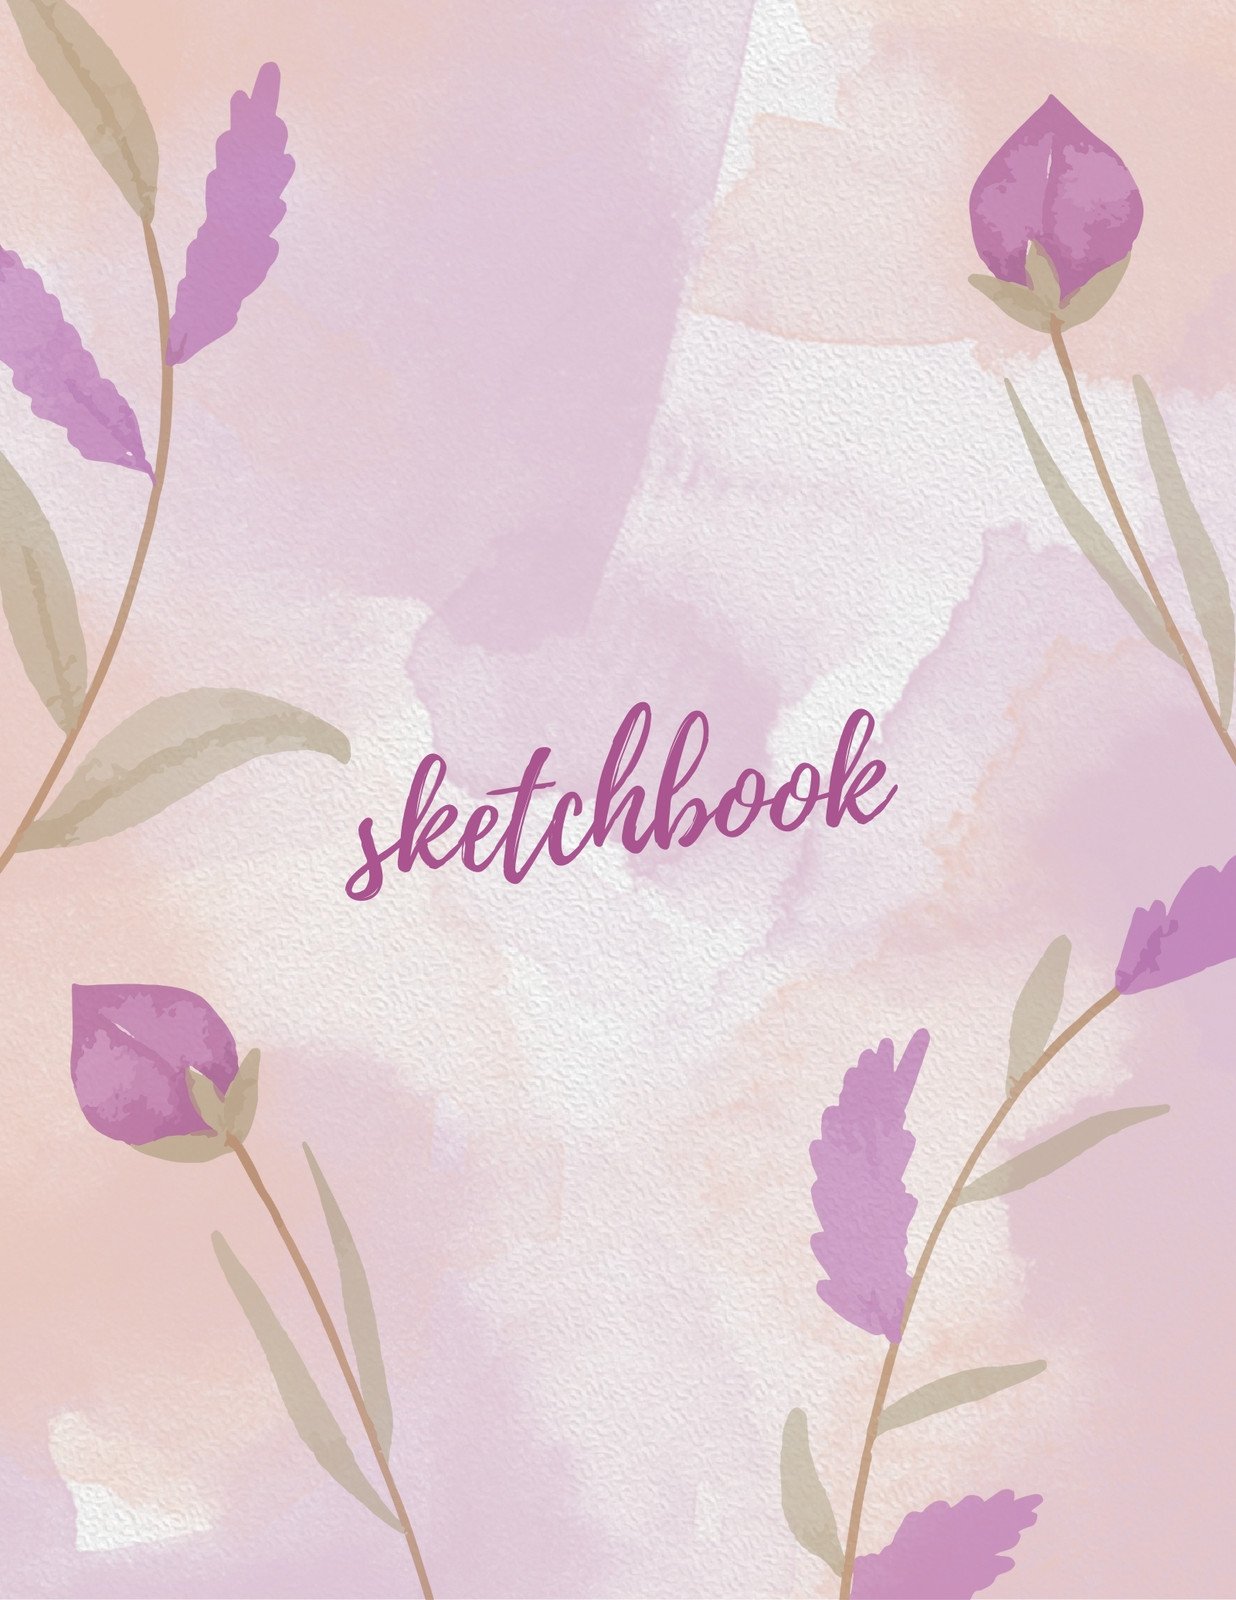  Sketchbook for Aspiring Artists to Create: 8.5 X 11 (120 Pages)  Minimalist Arch Theme Cover - Perfect for Drawing, Sketching, and Doodling:  9798471630345: Press, Lavender: Books